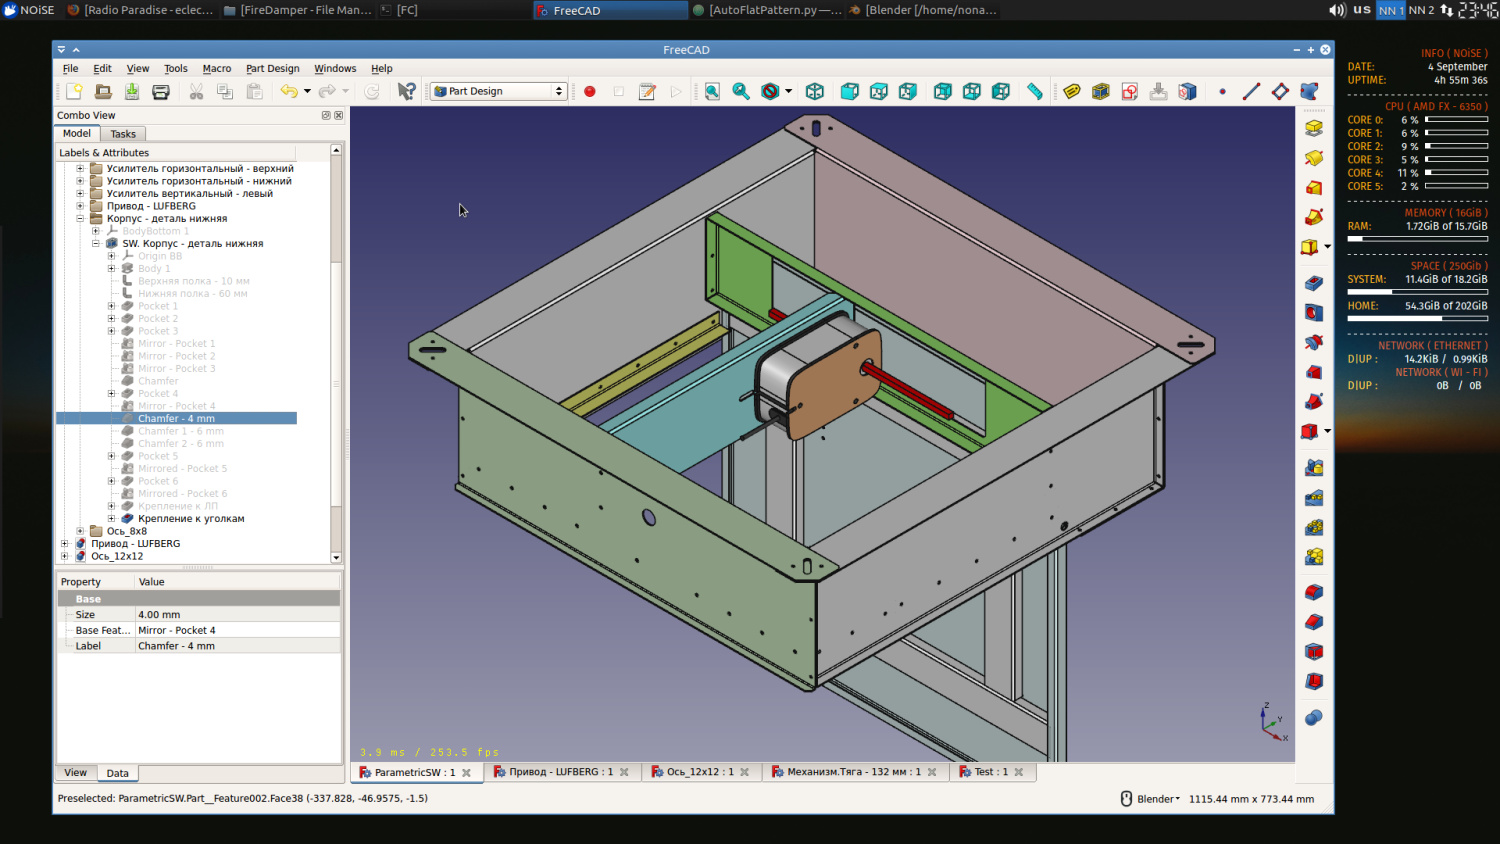 download the new FreeCAD 0.21.0